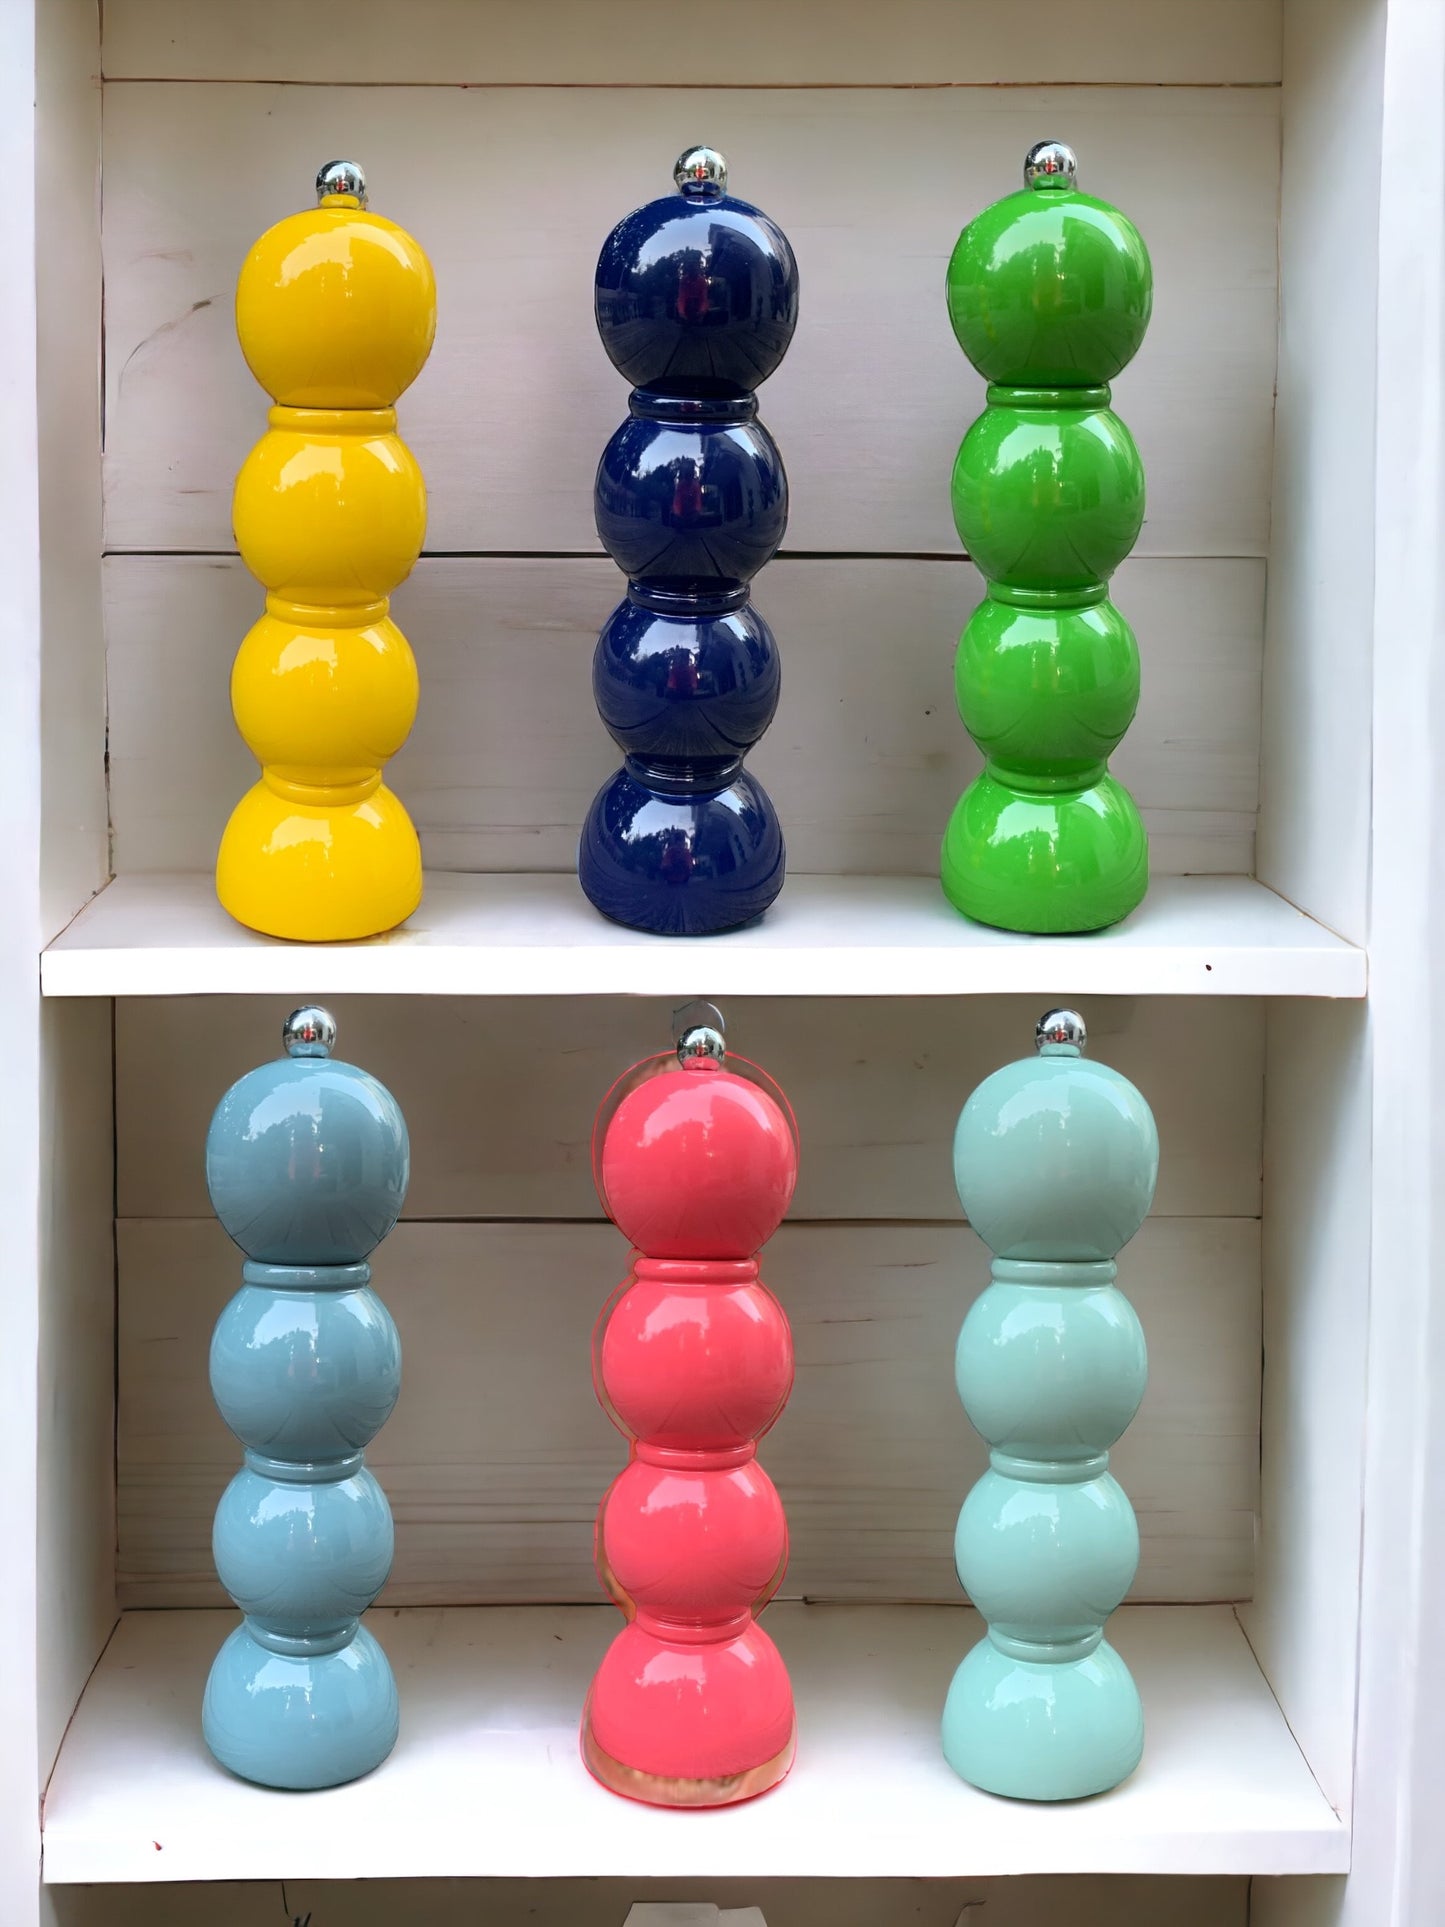 A collection of 6 brightly coloured bobbin salt & pepper grinders.  The colours are yellow, navy, green, blue, pink and chambray.